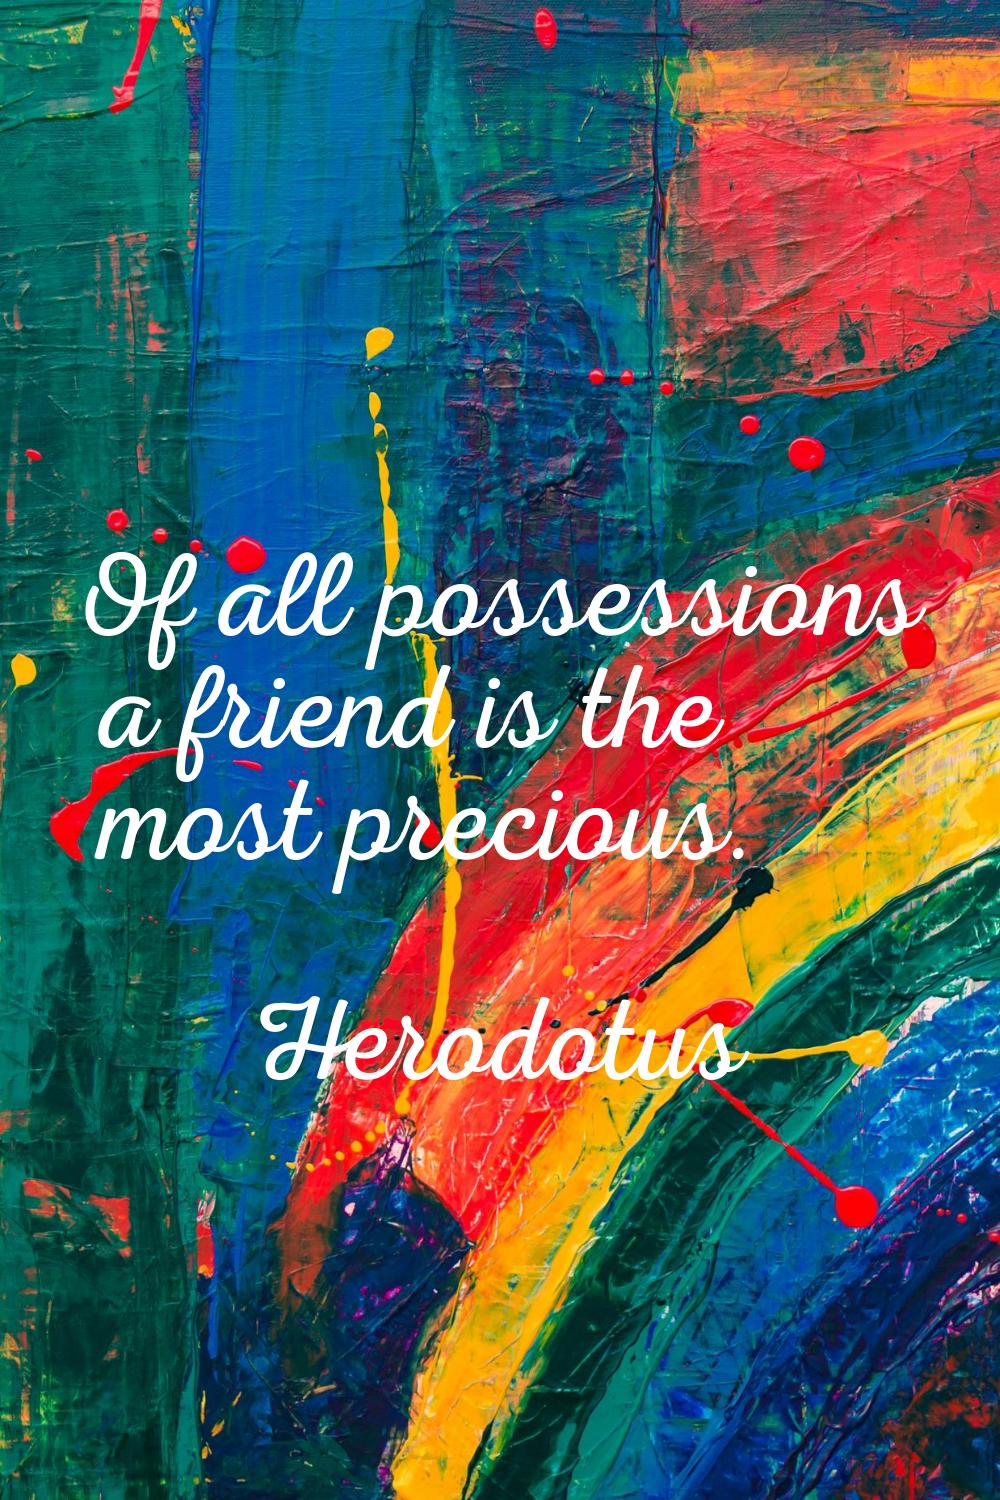 Of all possessions a friend is the most precious.